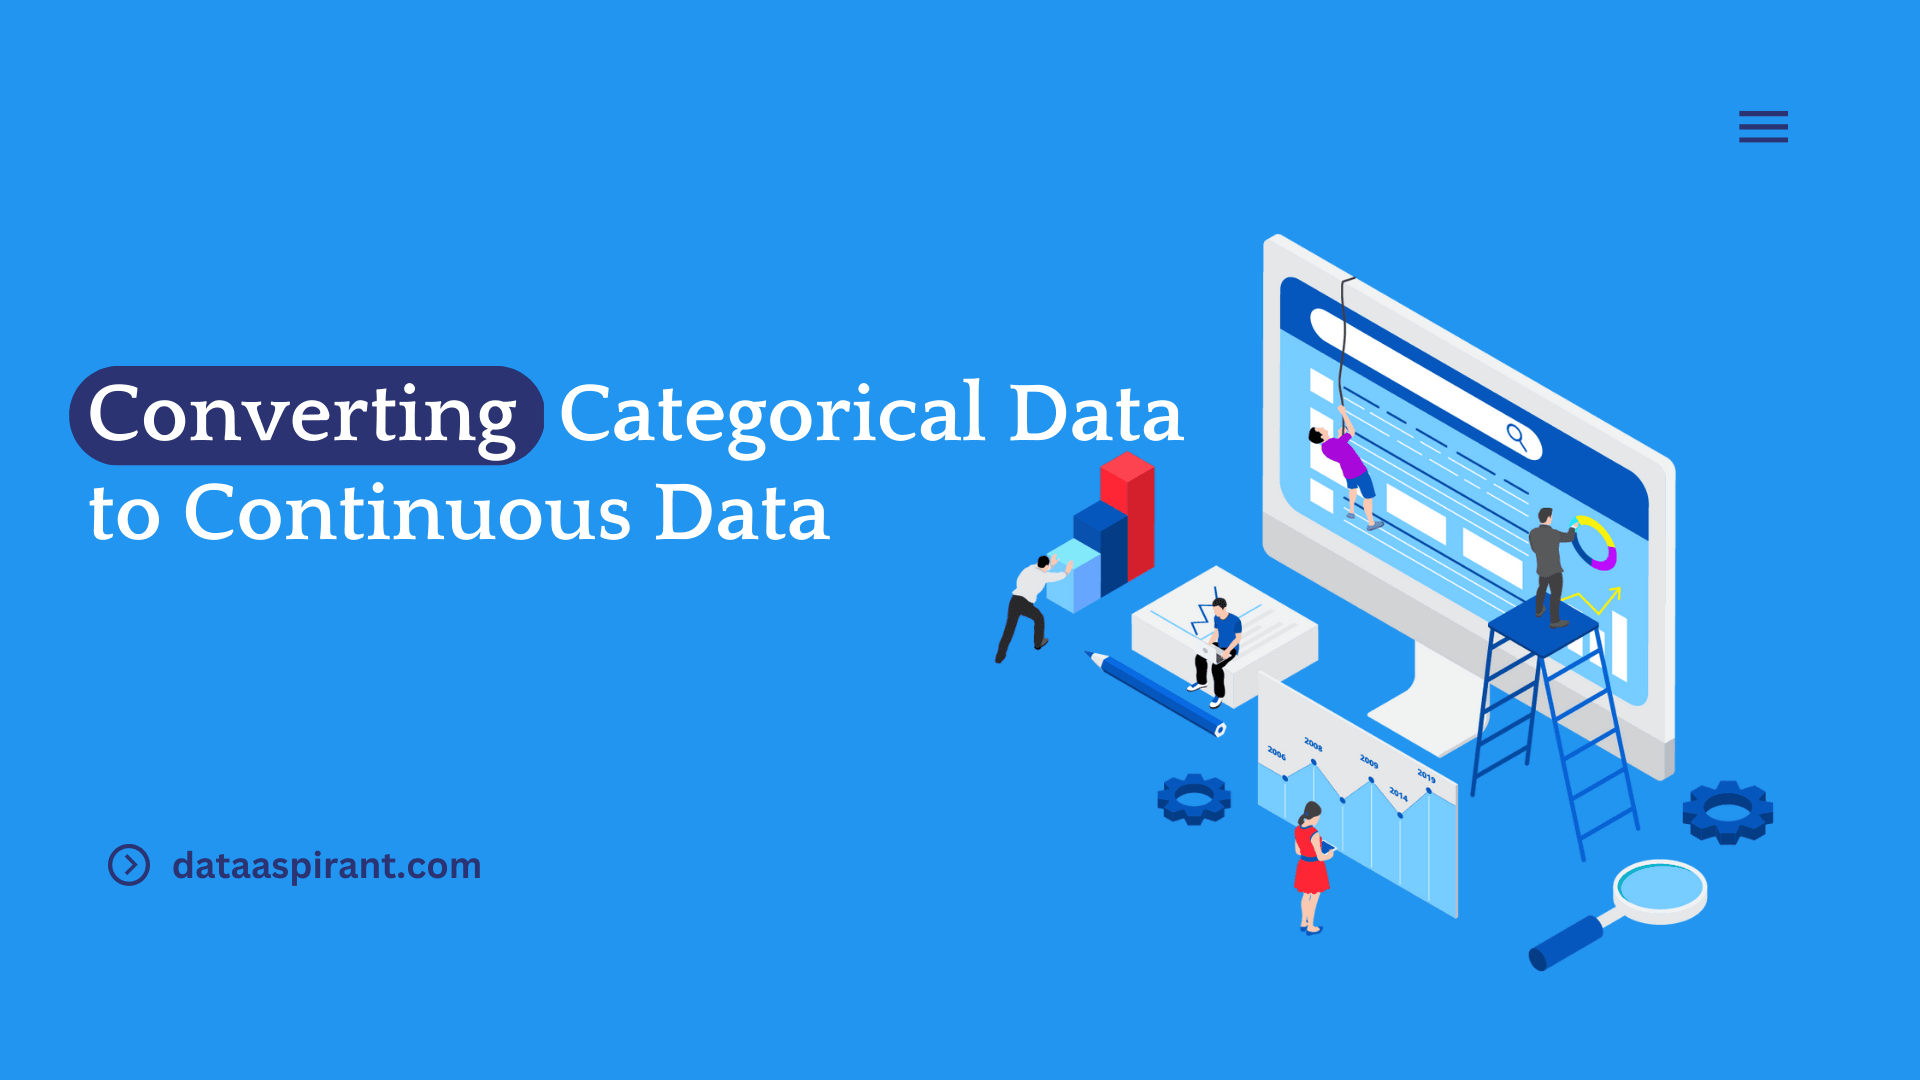 Converting Categorical Data to Continuous Data